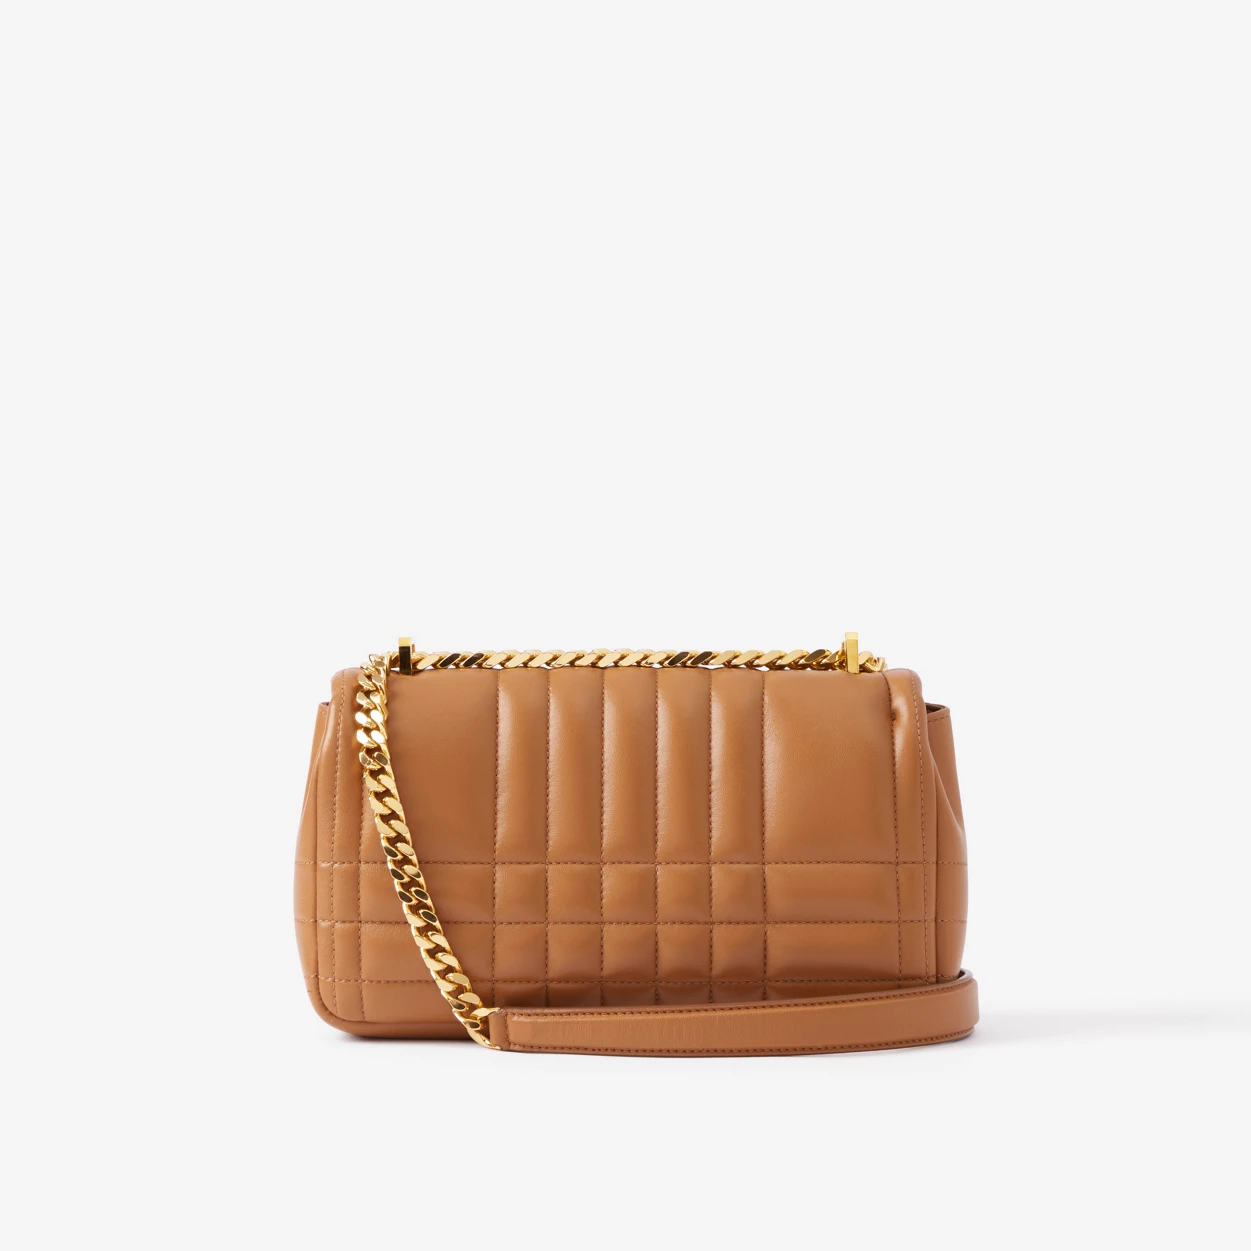 BURBERRY SMALL LOLA BAG IN MAPLE BROWN BLANK ROOM